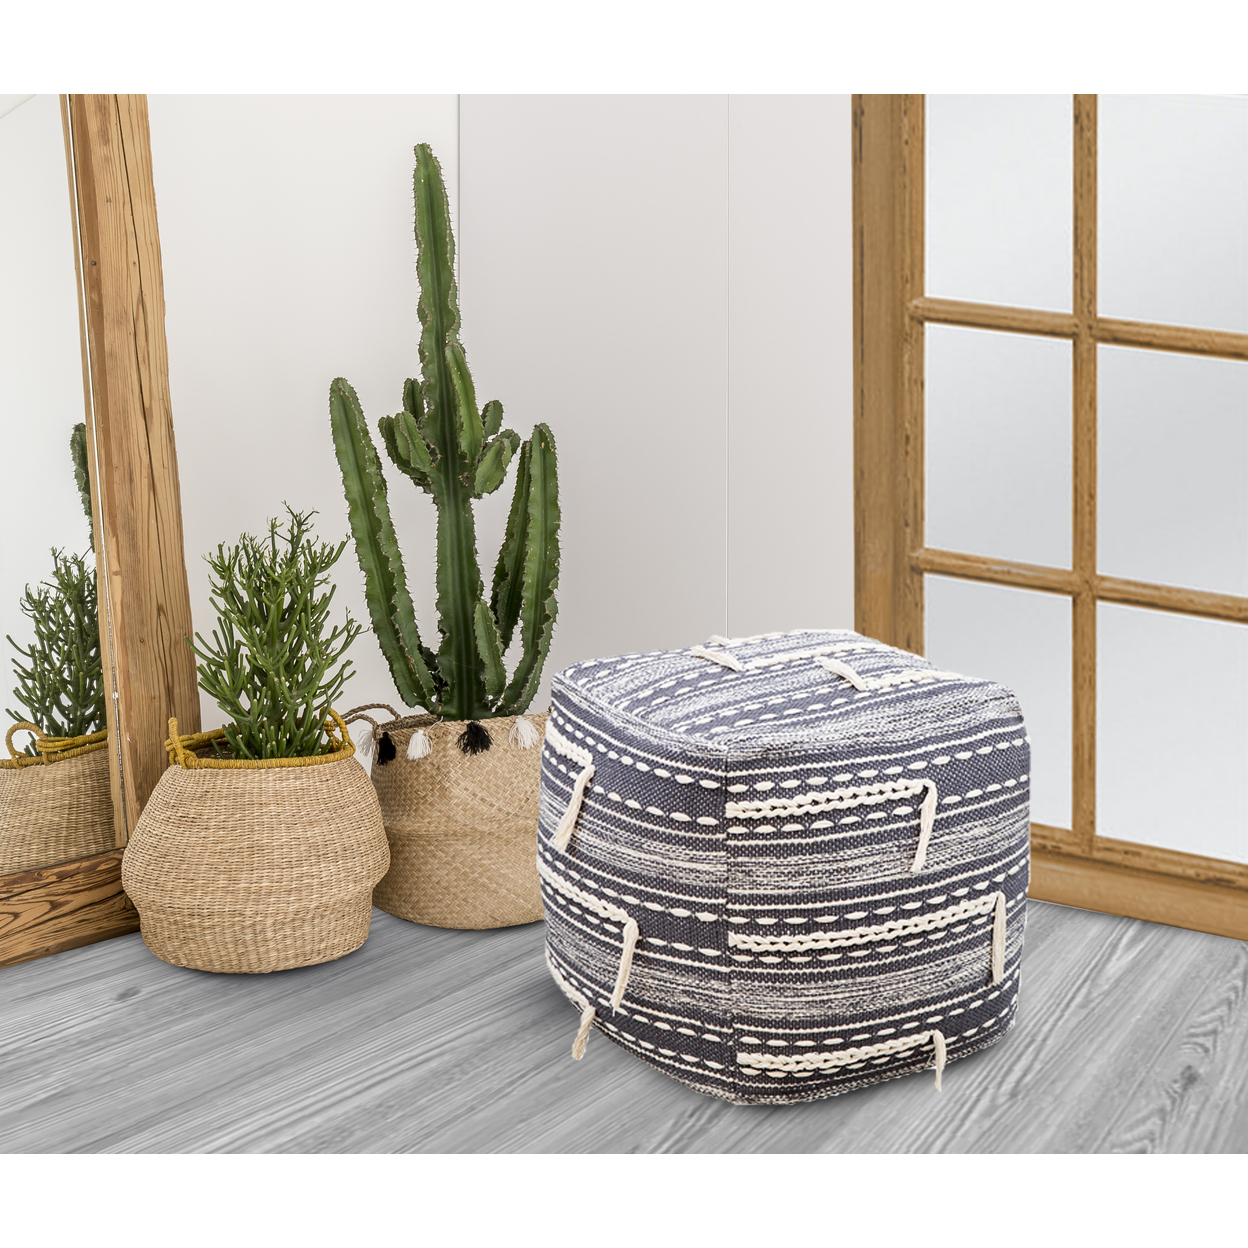 Iconic Home Spearman Ottoman Woven Cotton Upholstered Two-Tone Striped Pattern With Tassels Square Pouf - Grey